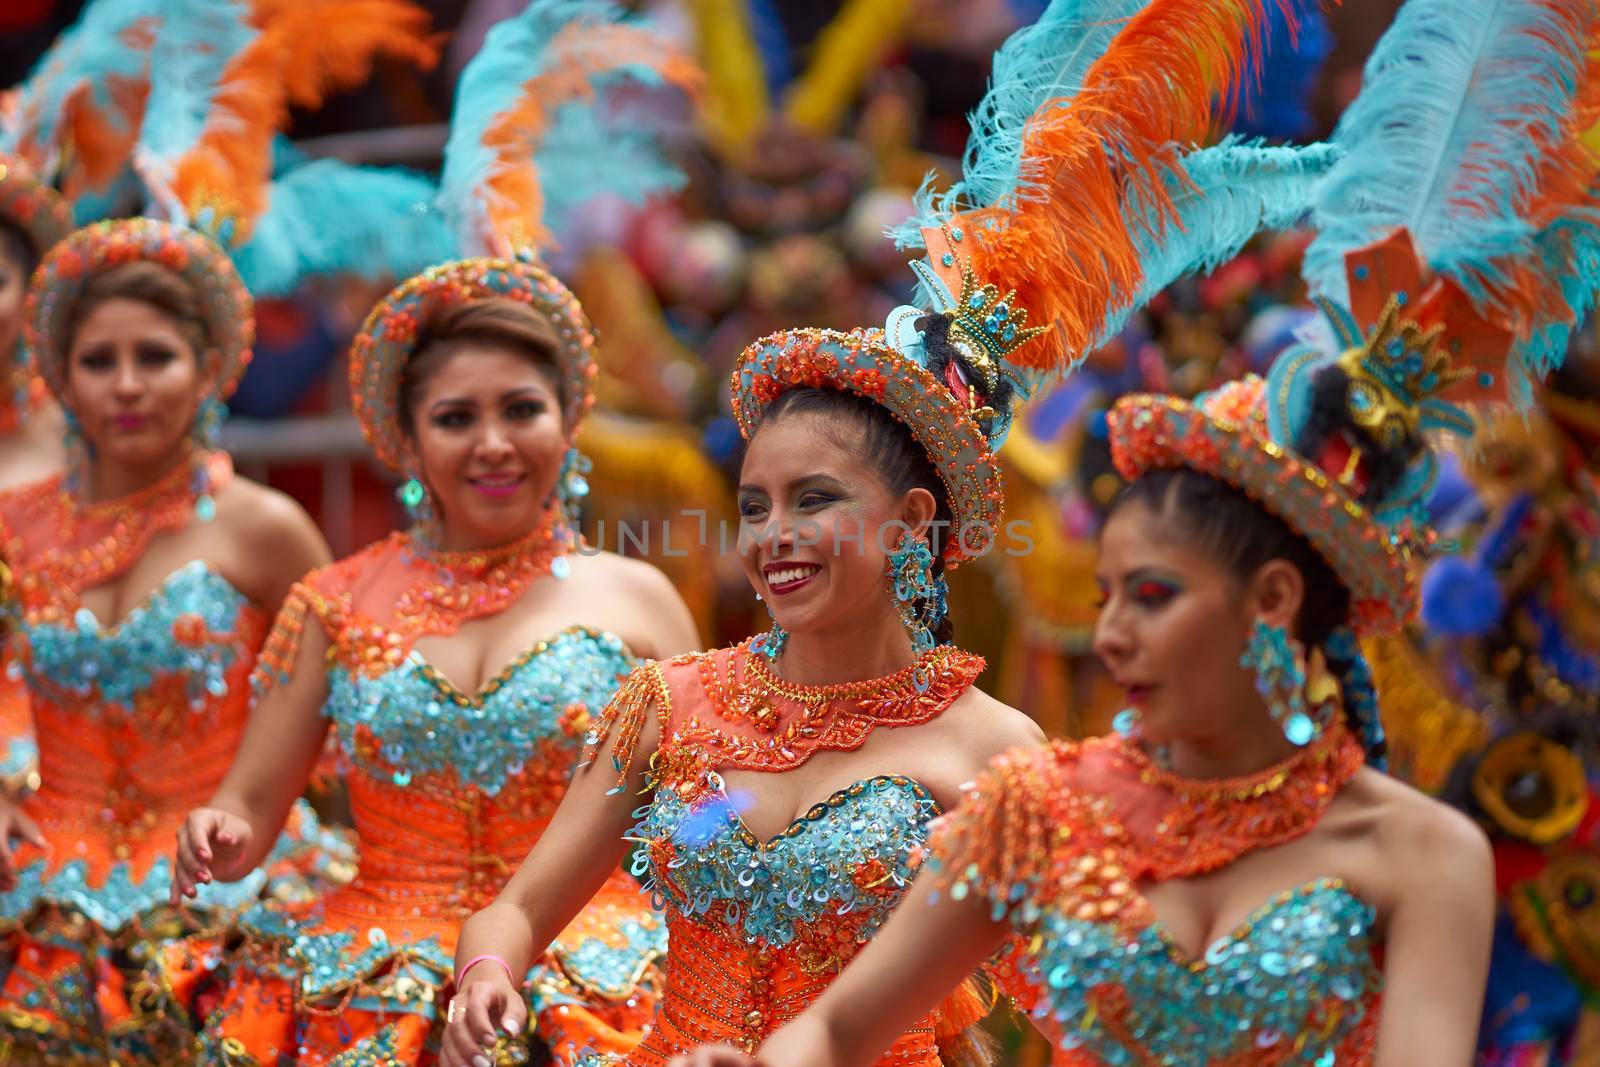 ORURO, BOLIVIA - FEBRUARY 25, 2017: Female Morenada dancers in colourful costumes parading through the mining city of Oruro on the Altiplano of Bolivia during the annual Oruro Carnival.